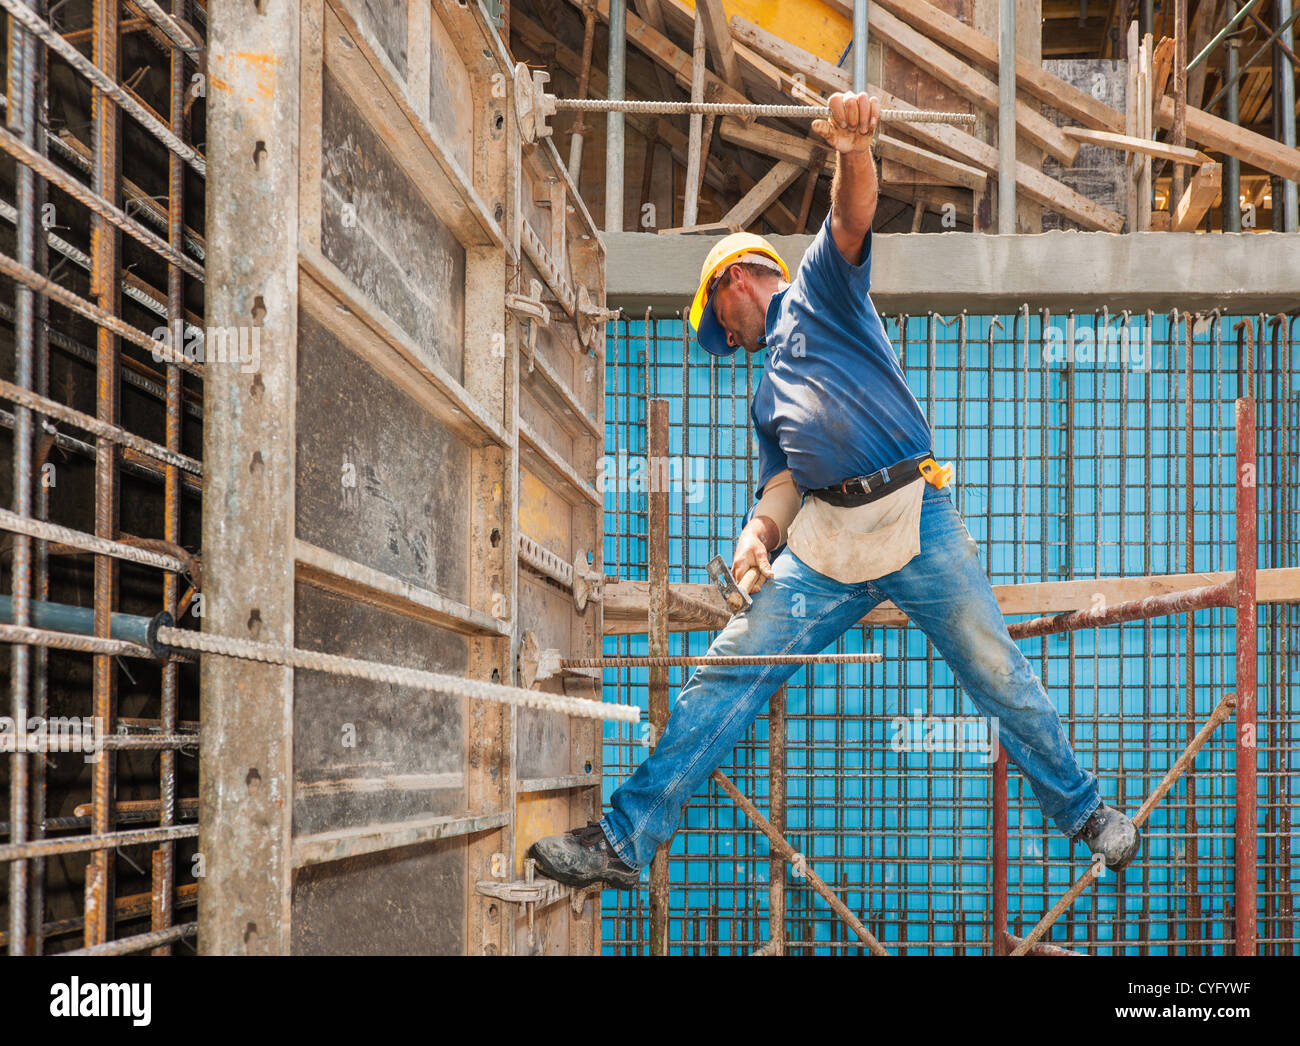 Construction worker balancing between scaffold and formwork frame Stock Photo